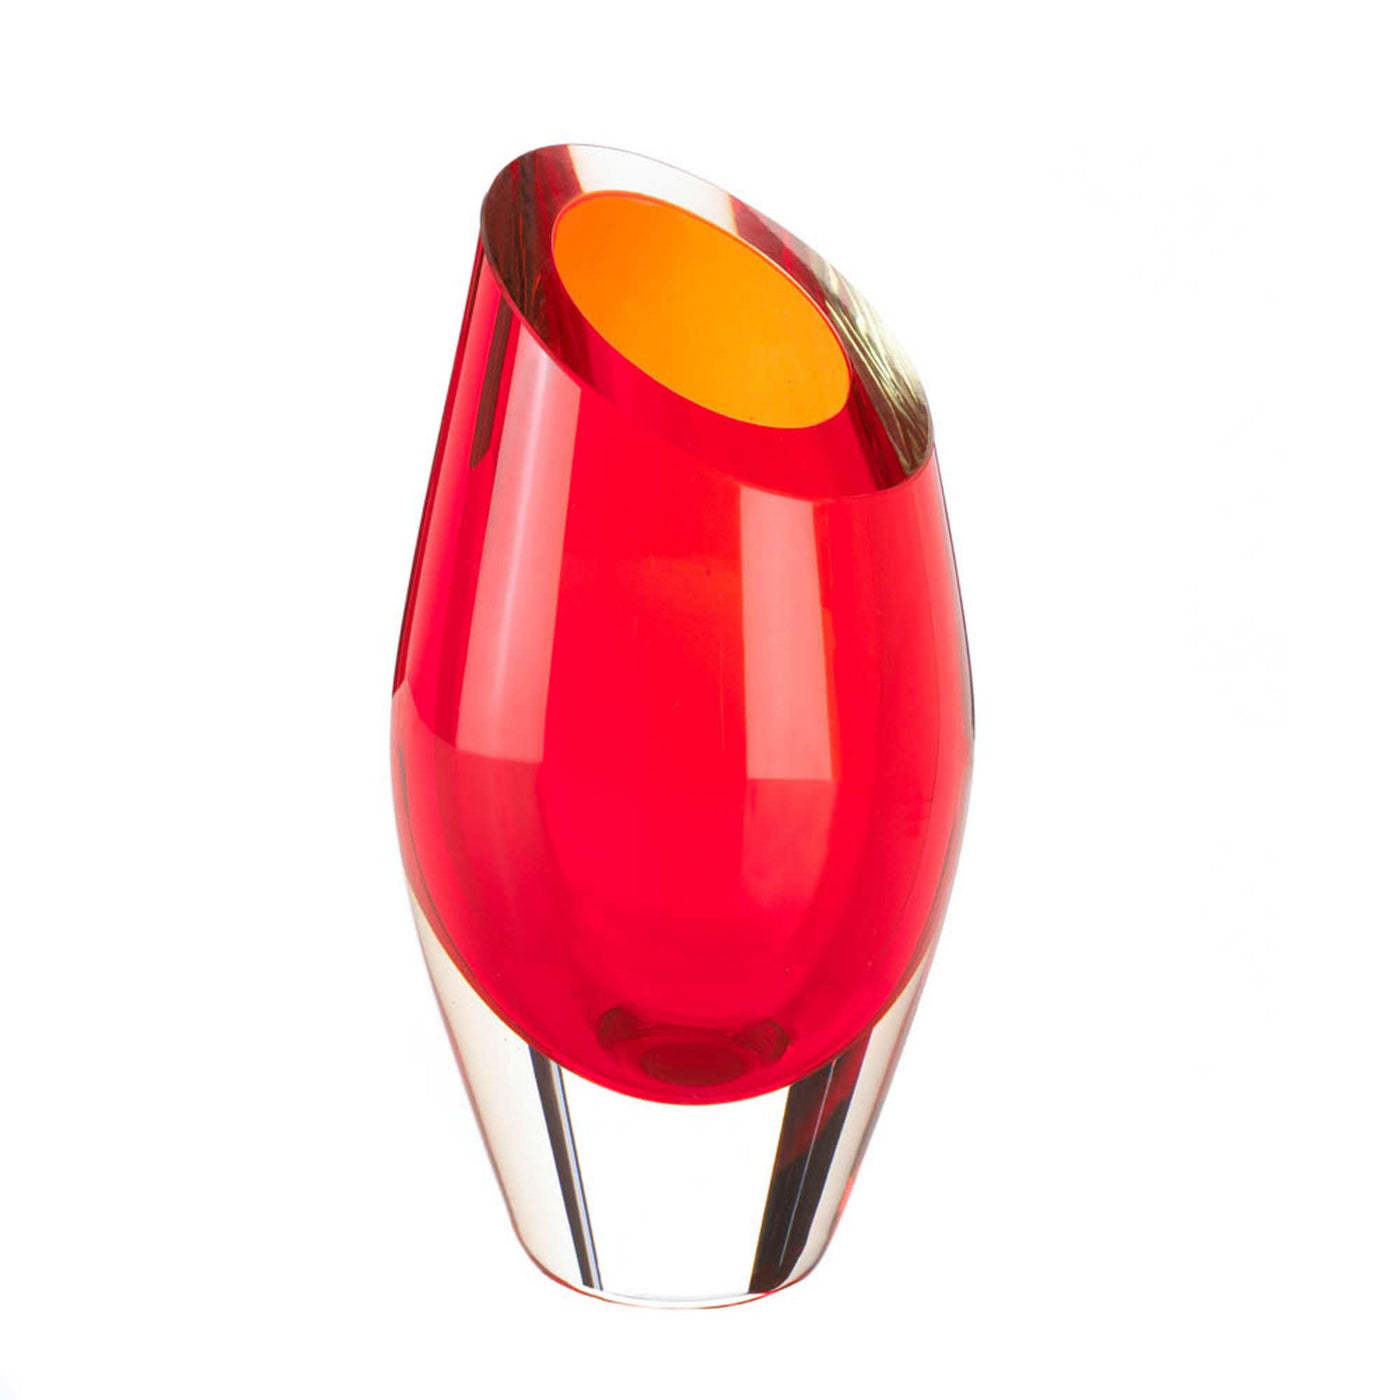 Red Cut Glass Vase - $47.70